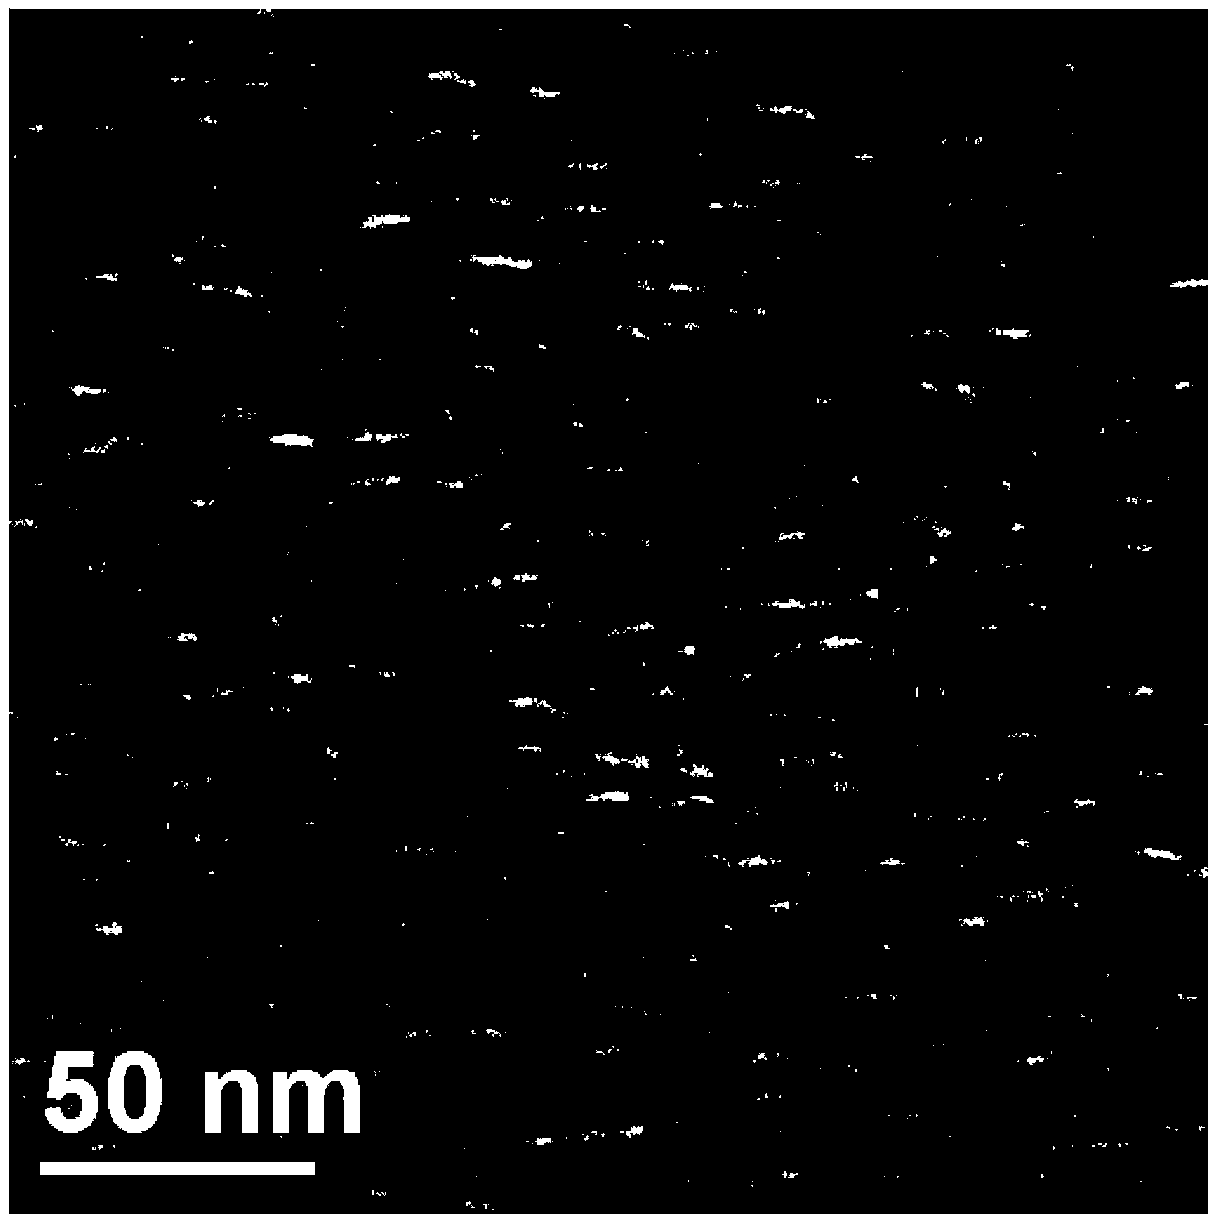 Collagen-g-polymer/Ag multi-hole nano antibacterial film material and preparation method thereof